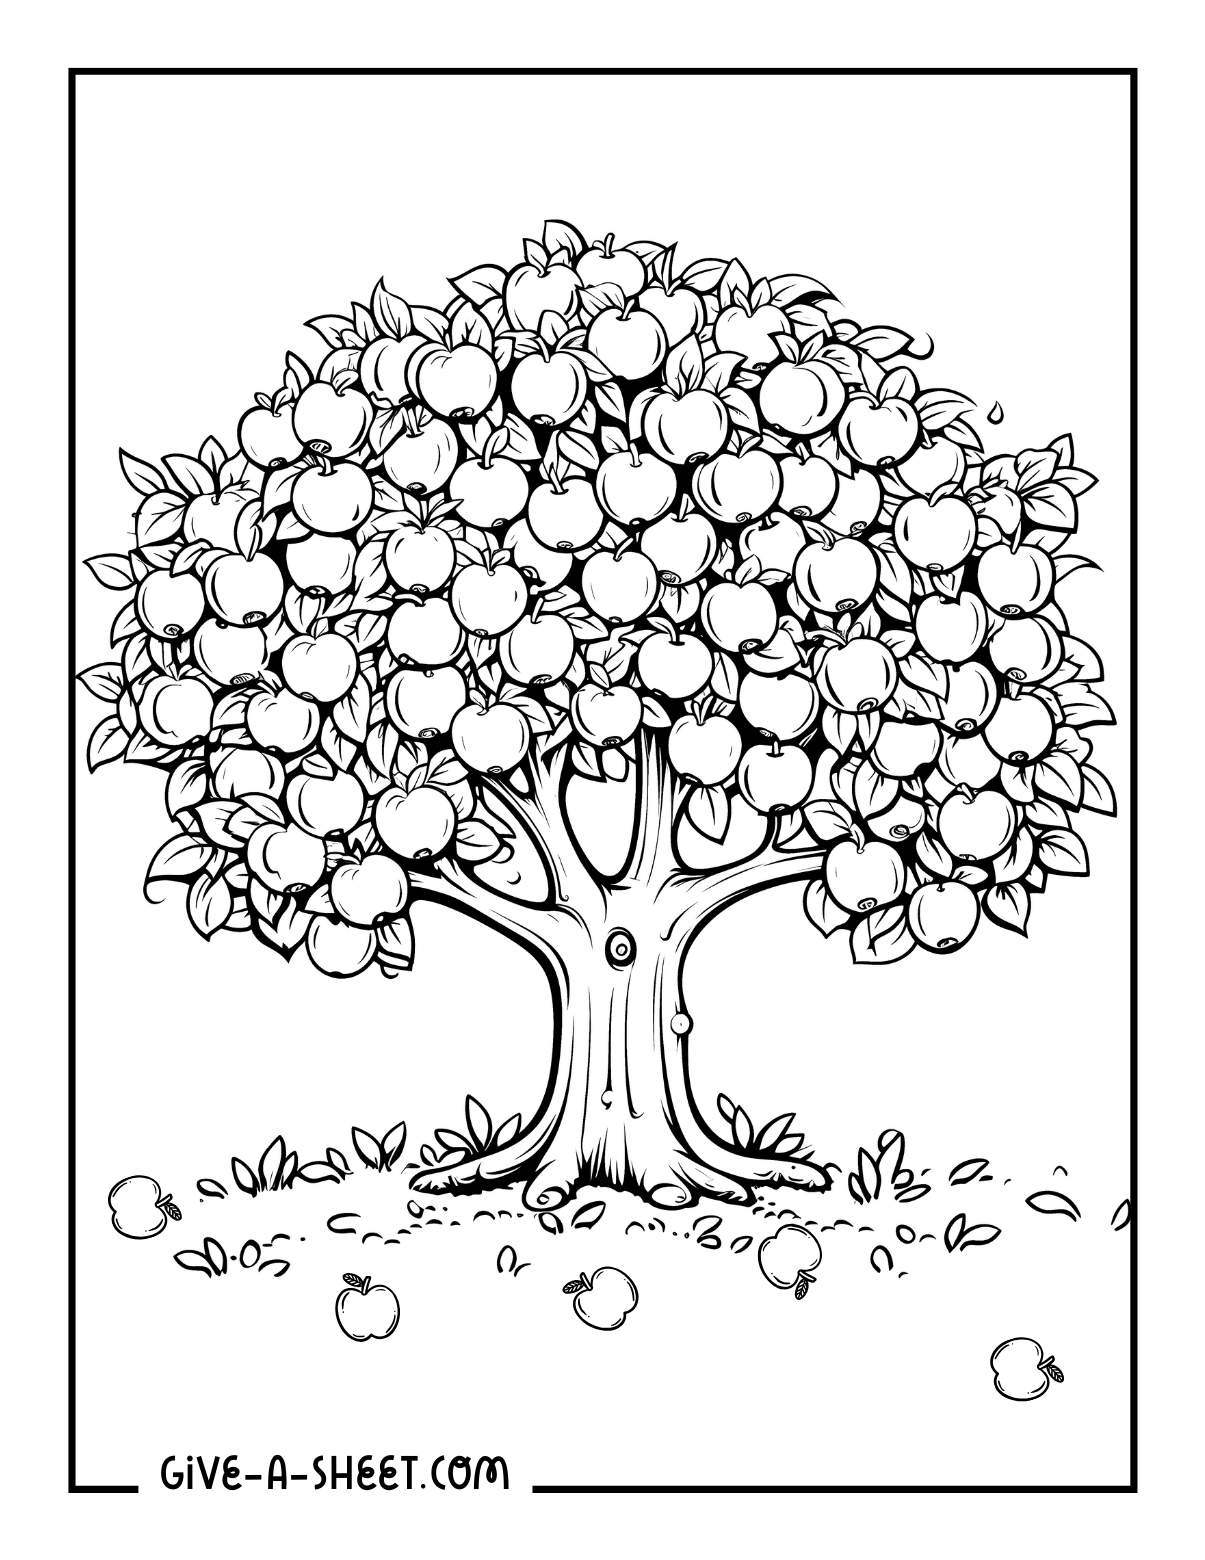 Fallen apples tree coloring page for kids.